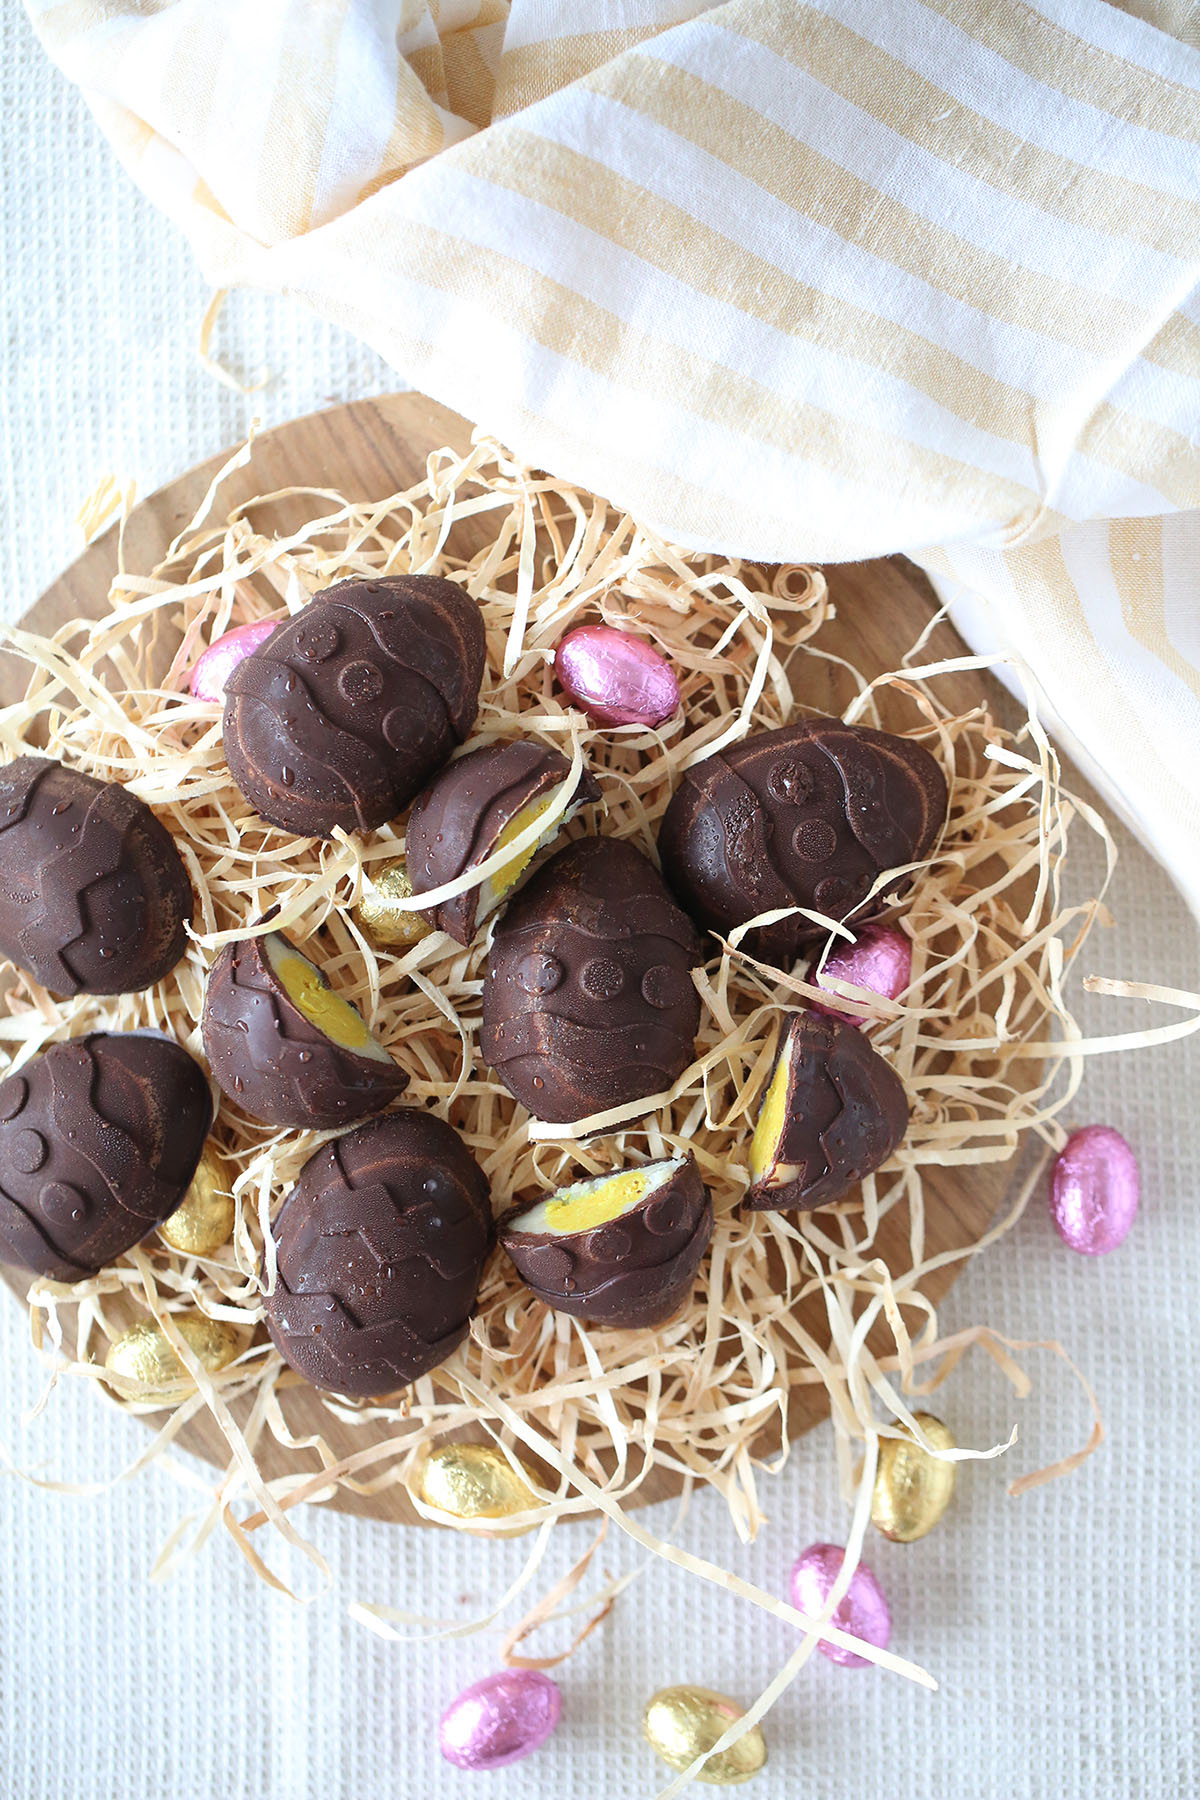 A healthy vegan version of your favourite Easter egg – with no dairy, refined sugar, or unrecognisable numbers. Super fun to make and eat!